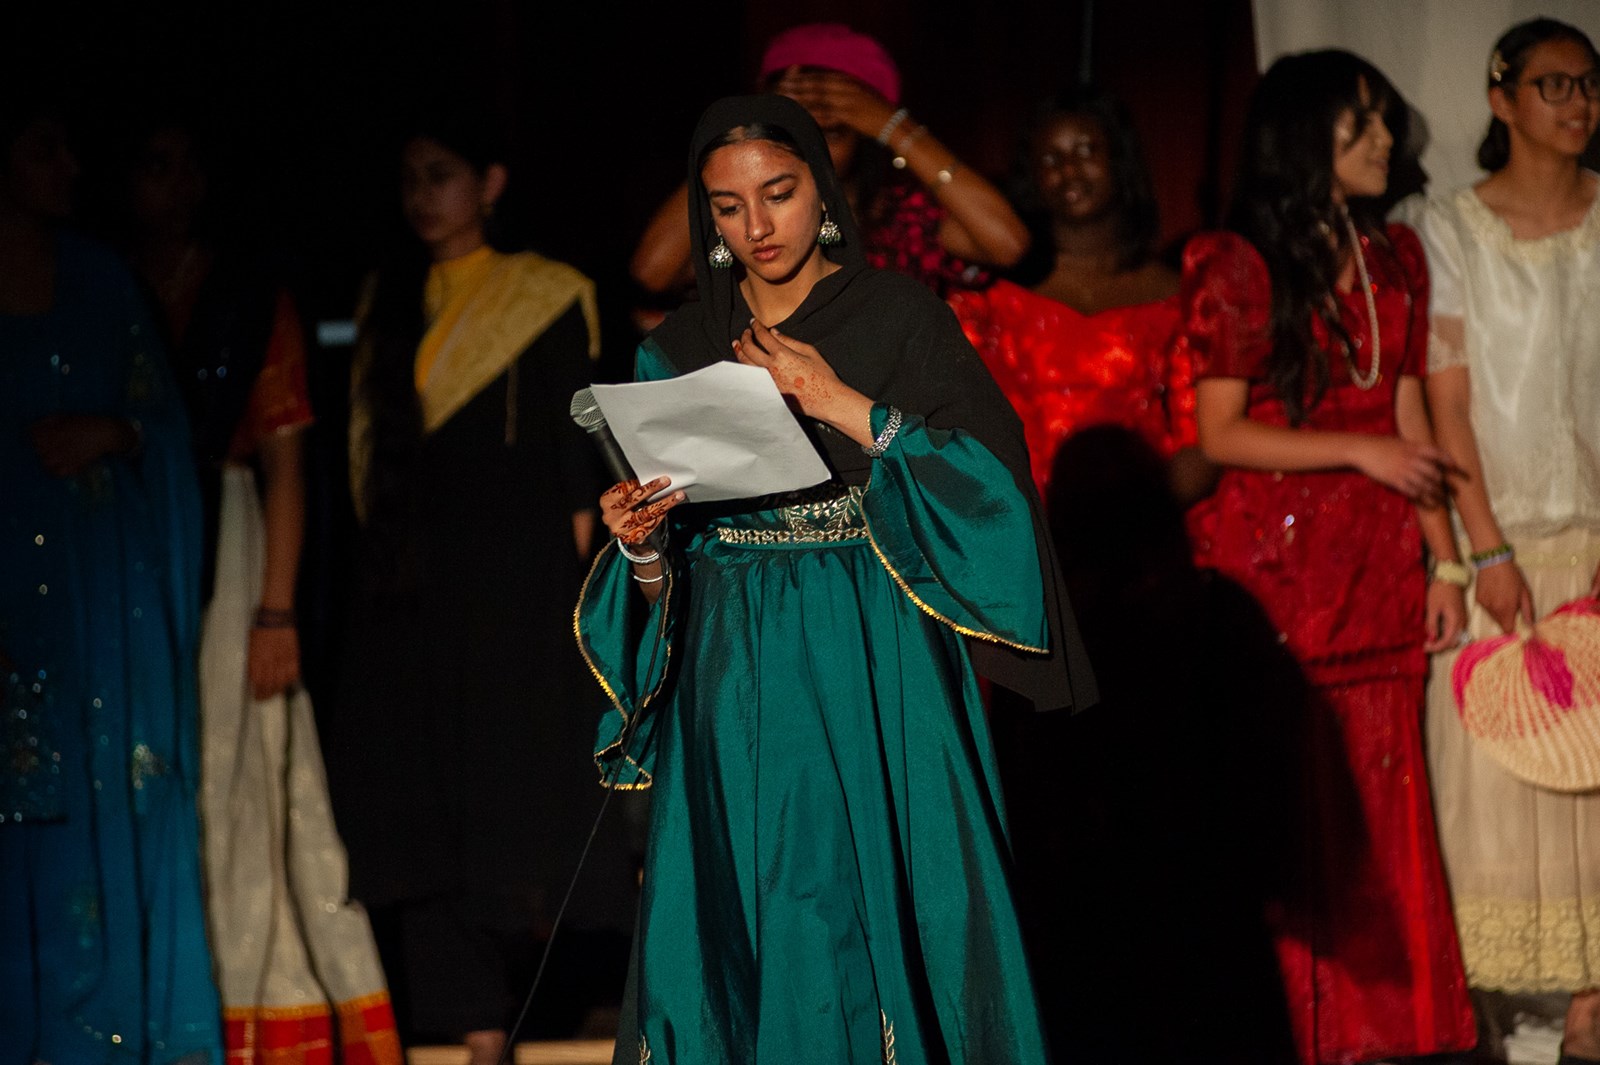 Cultural Gala M.C. Shafia Razzaq reads a piece of paper and holds a microphone. There are students in a variety cultural clothing in the shadows behind her.